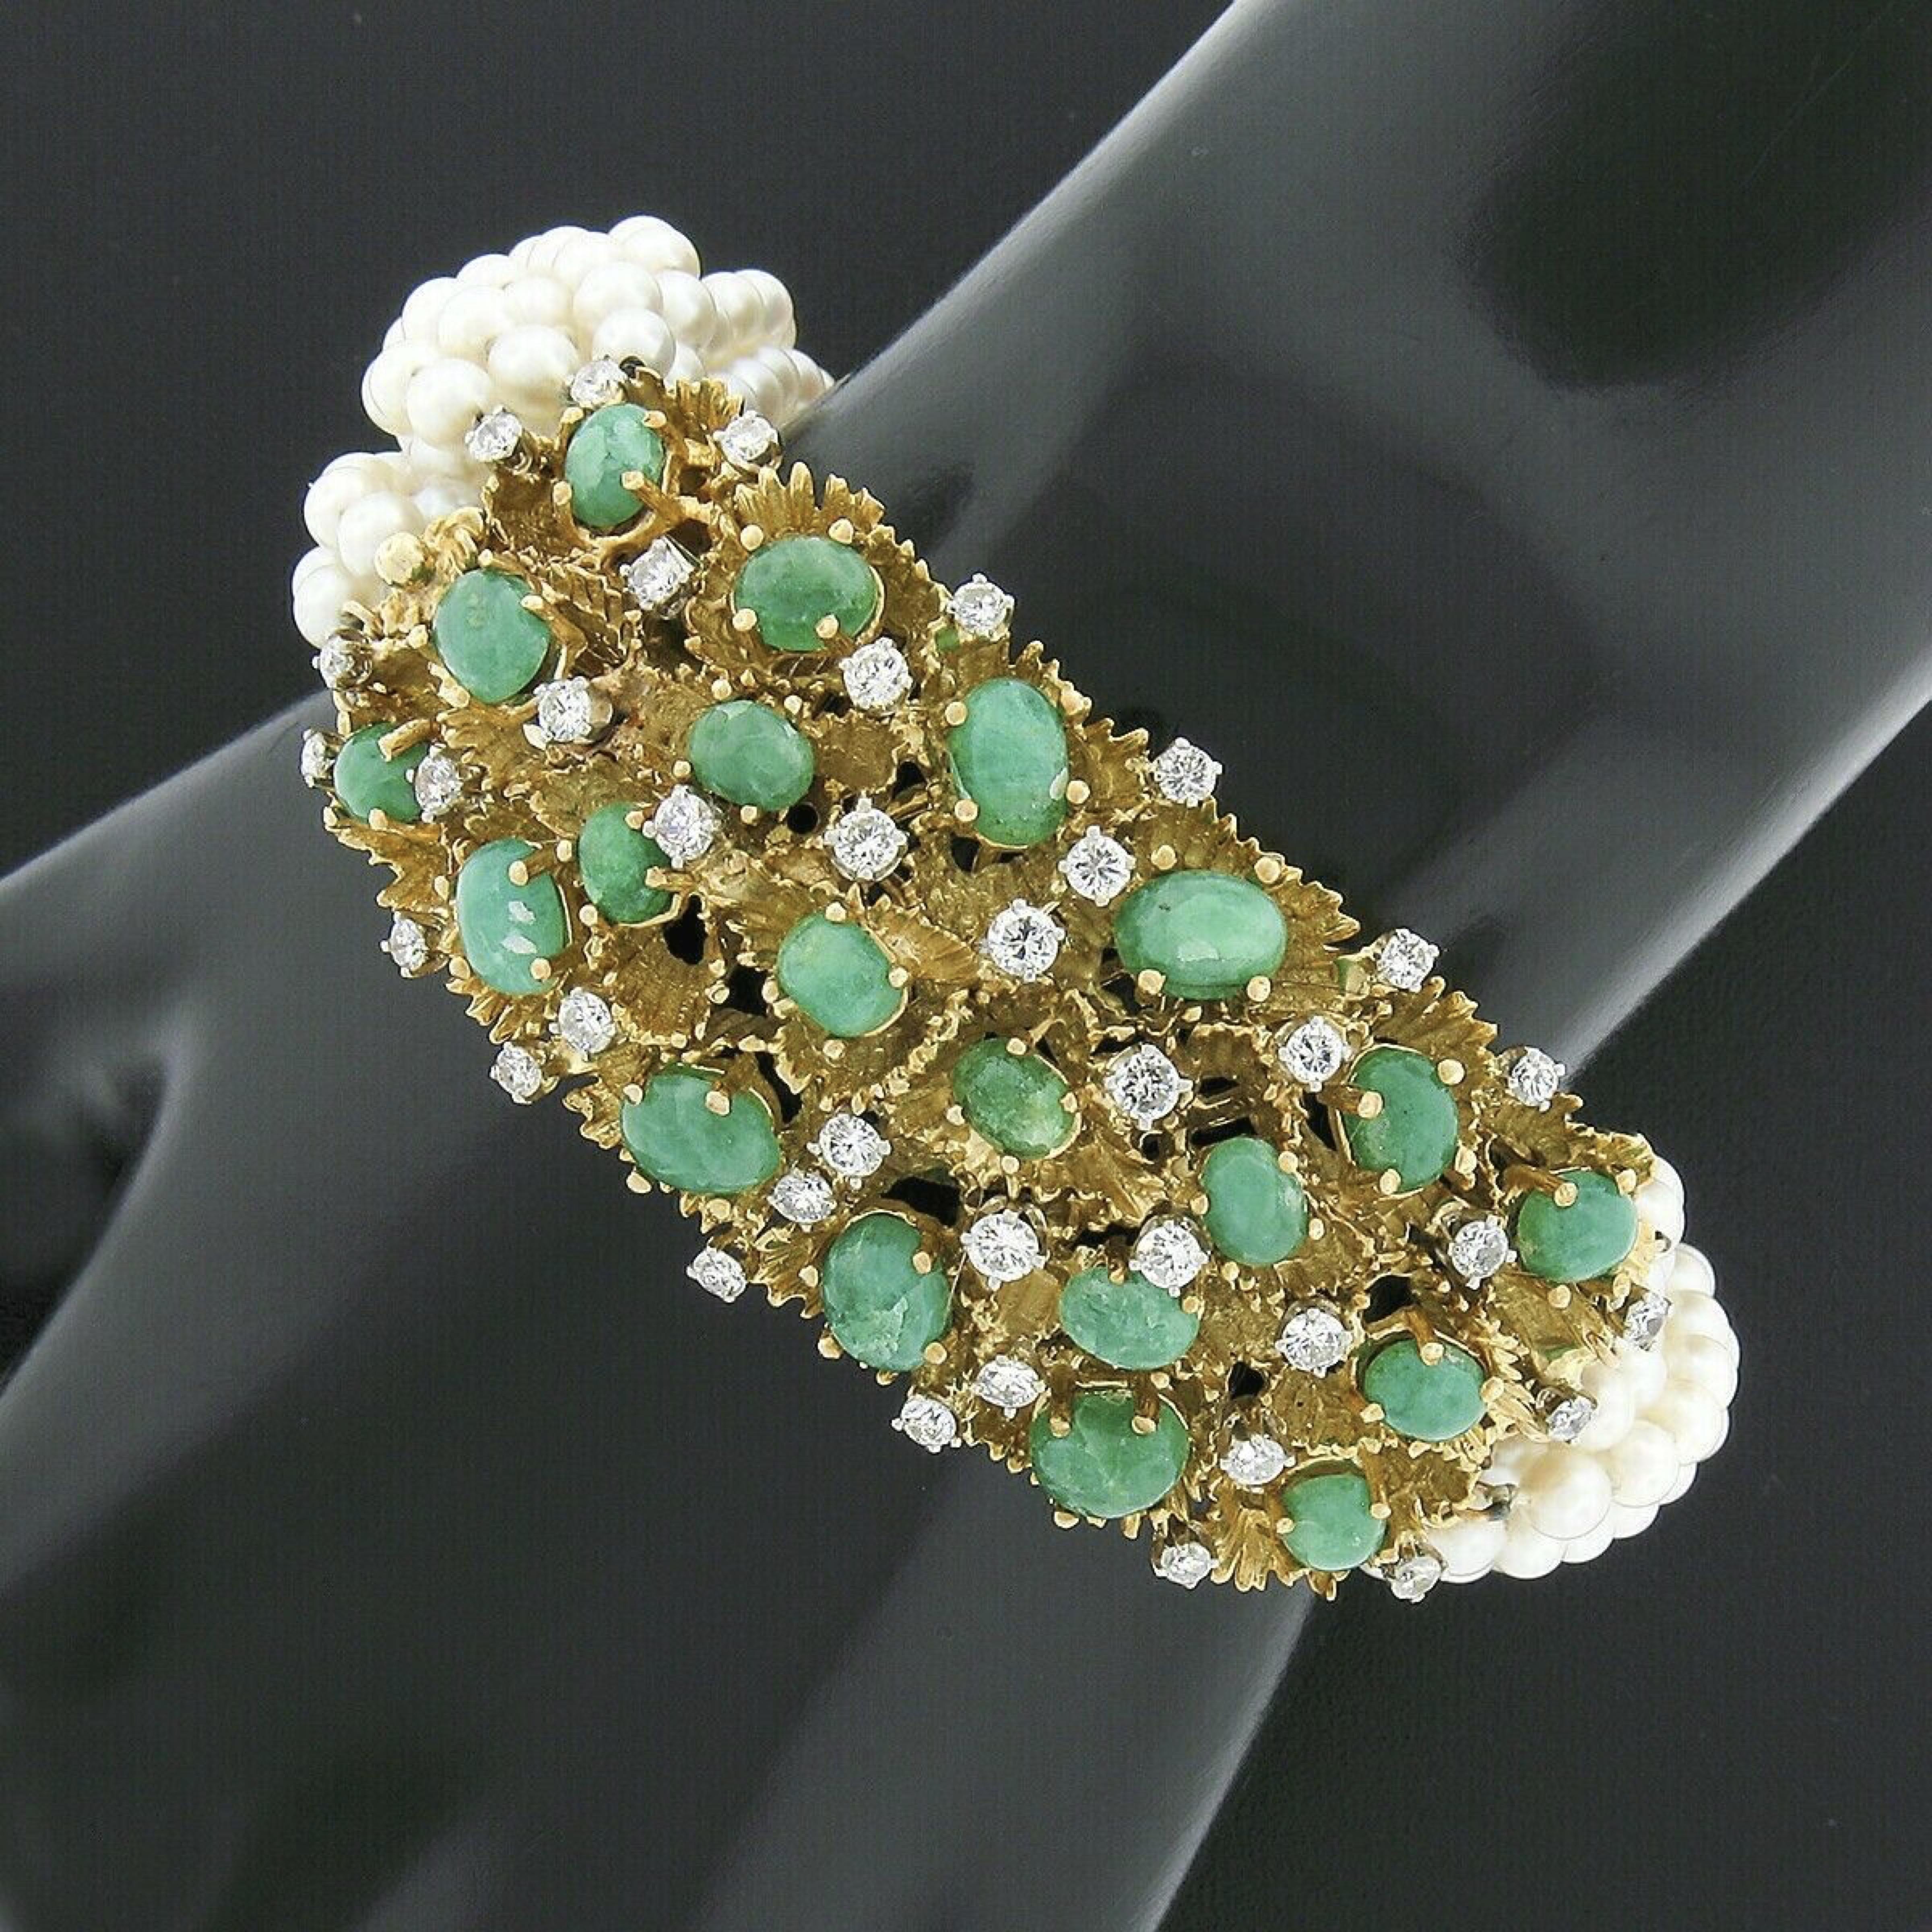 Vintage 18k Gold 14.65ctw Diamond & Cabochon Emerald 12 Strand Pearl Bracelet In Good Condition For Sale In Montclair, NJ